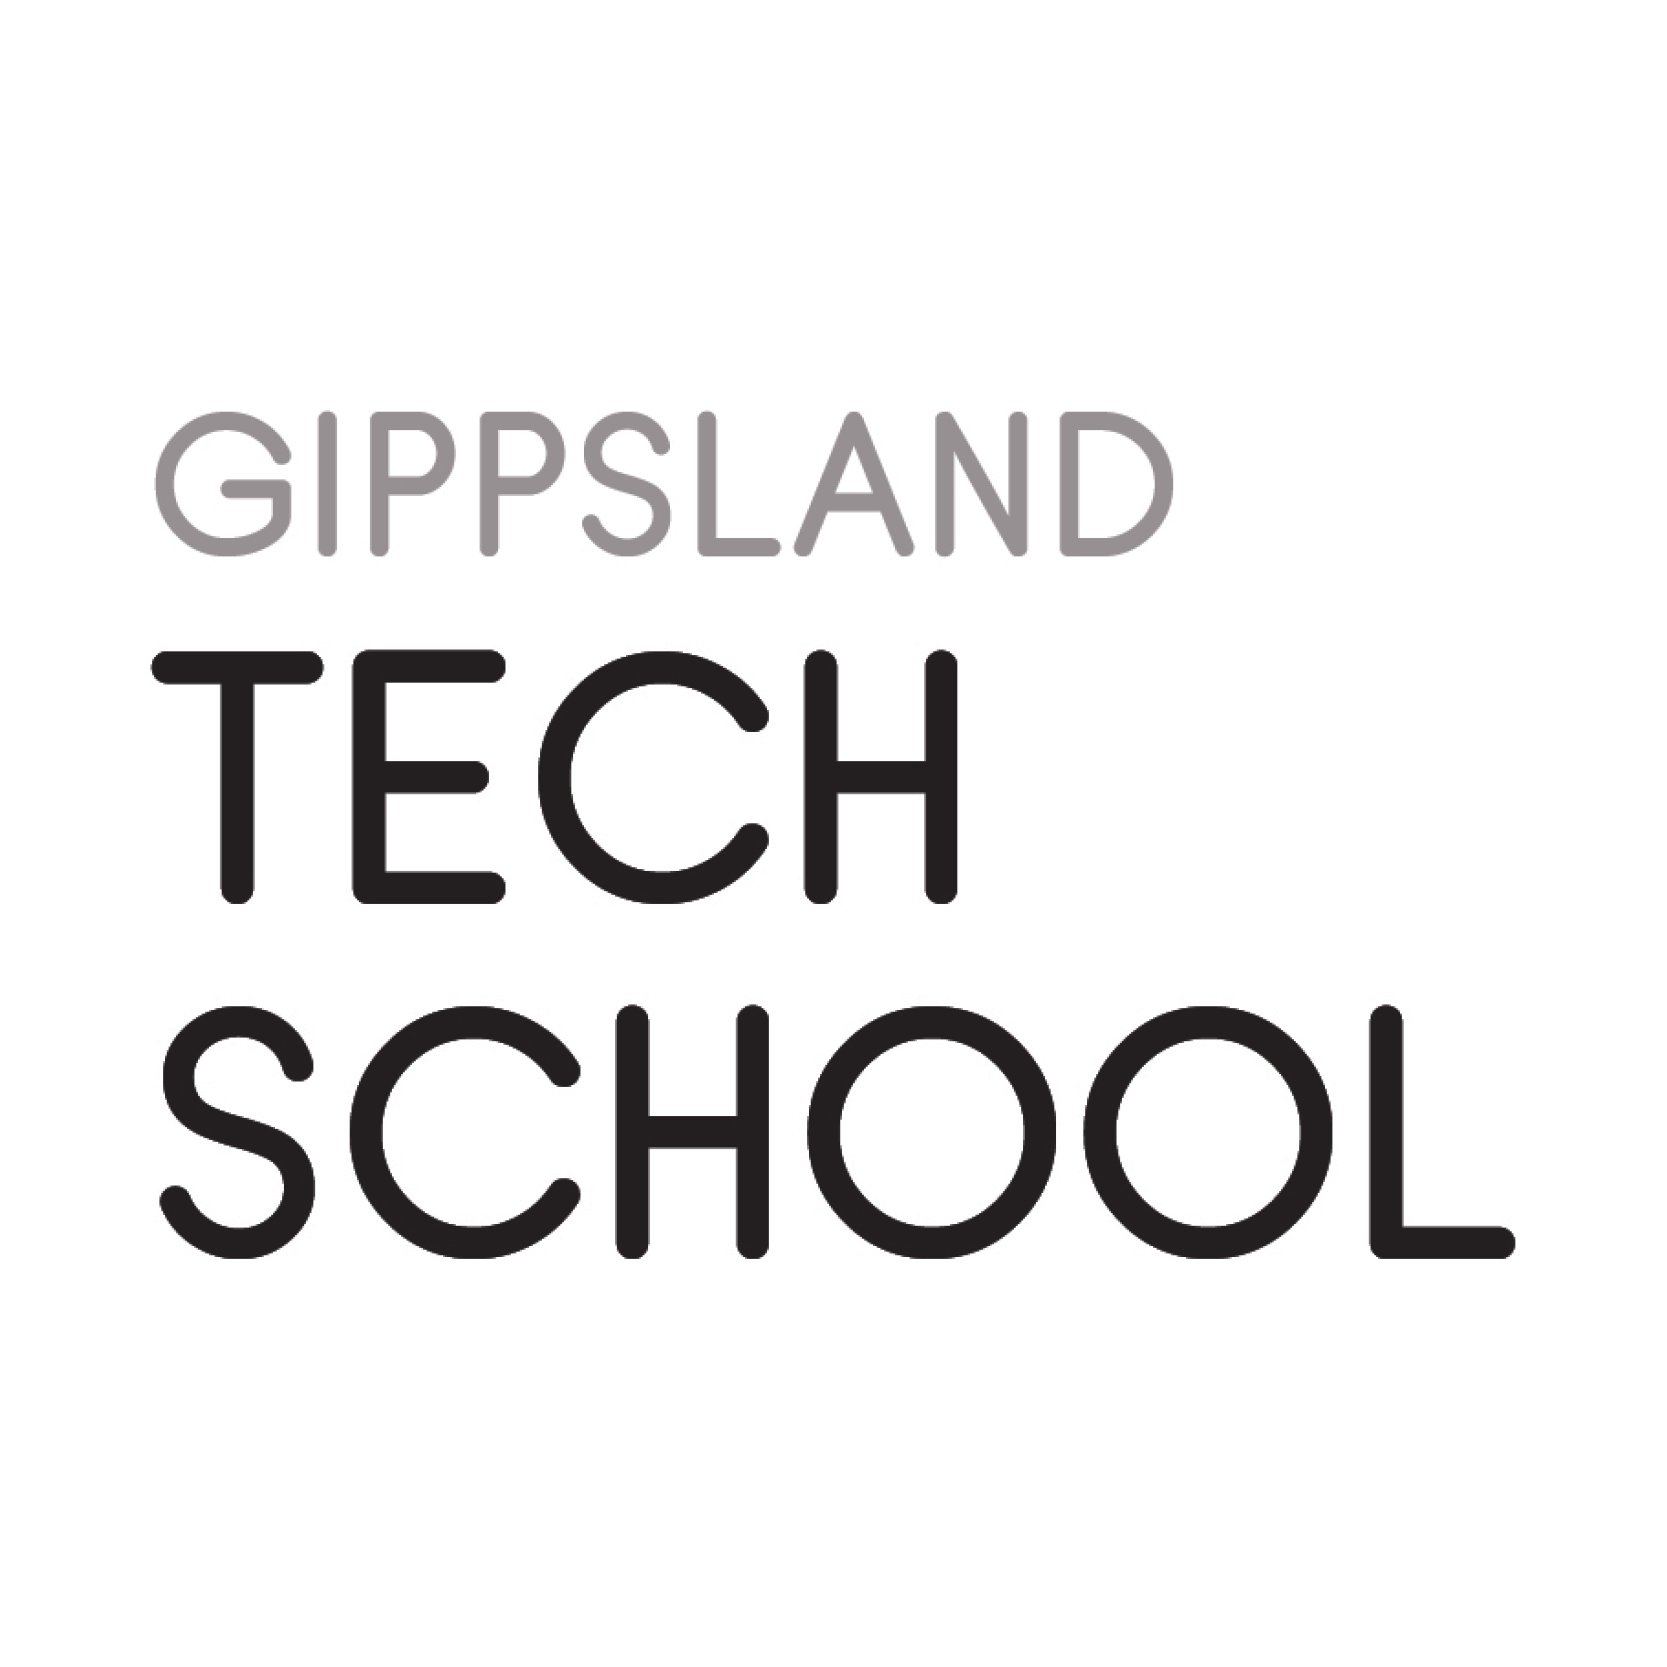 Secondary school students from the Gippsland area will have access to cutting-edge learning at the Gippsland Tech School.